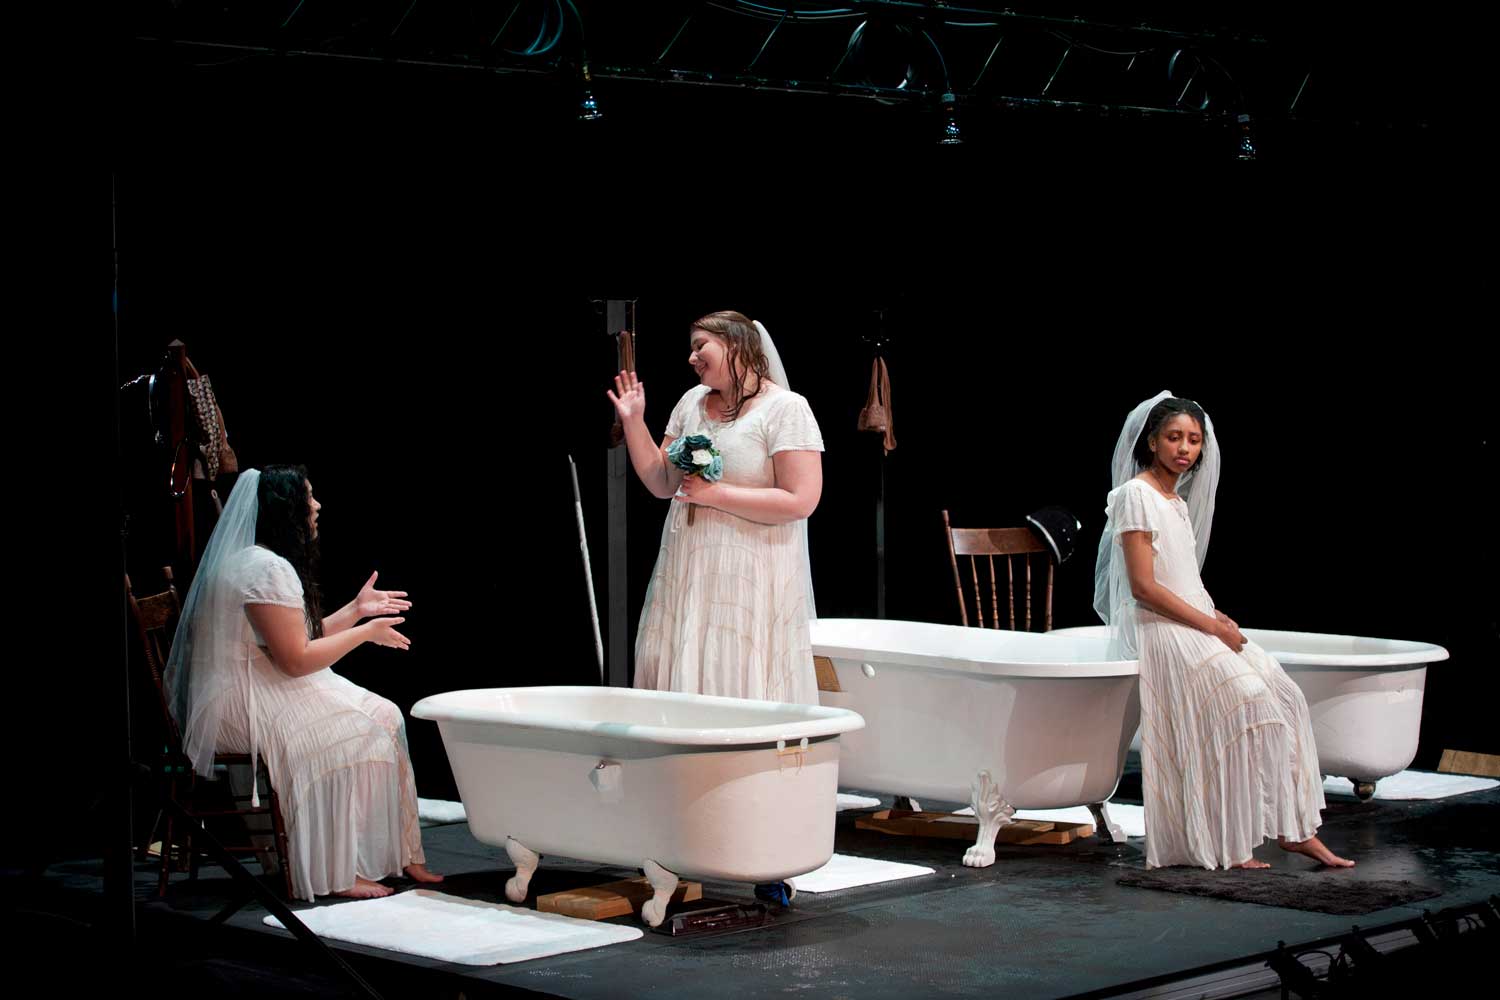 Three girls wearing wedding dresses with bathtubs in background